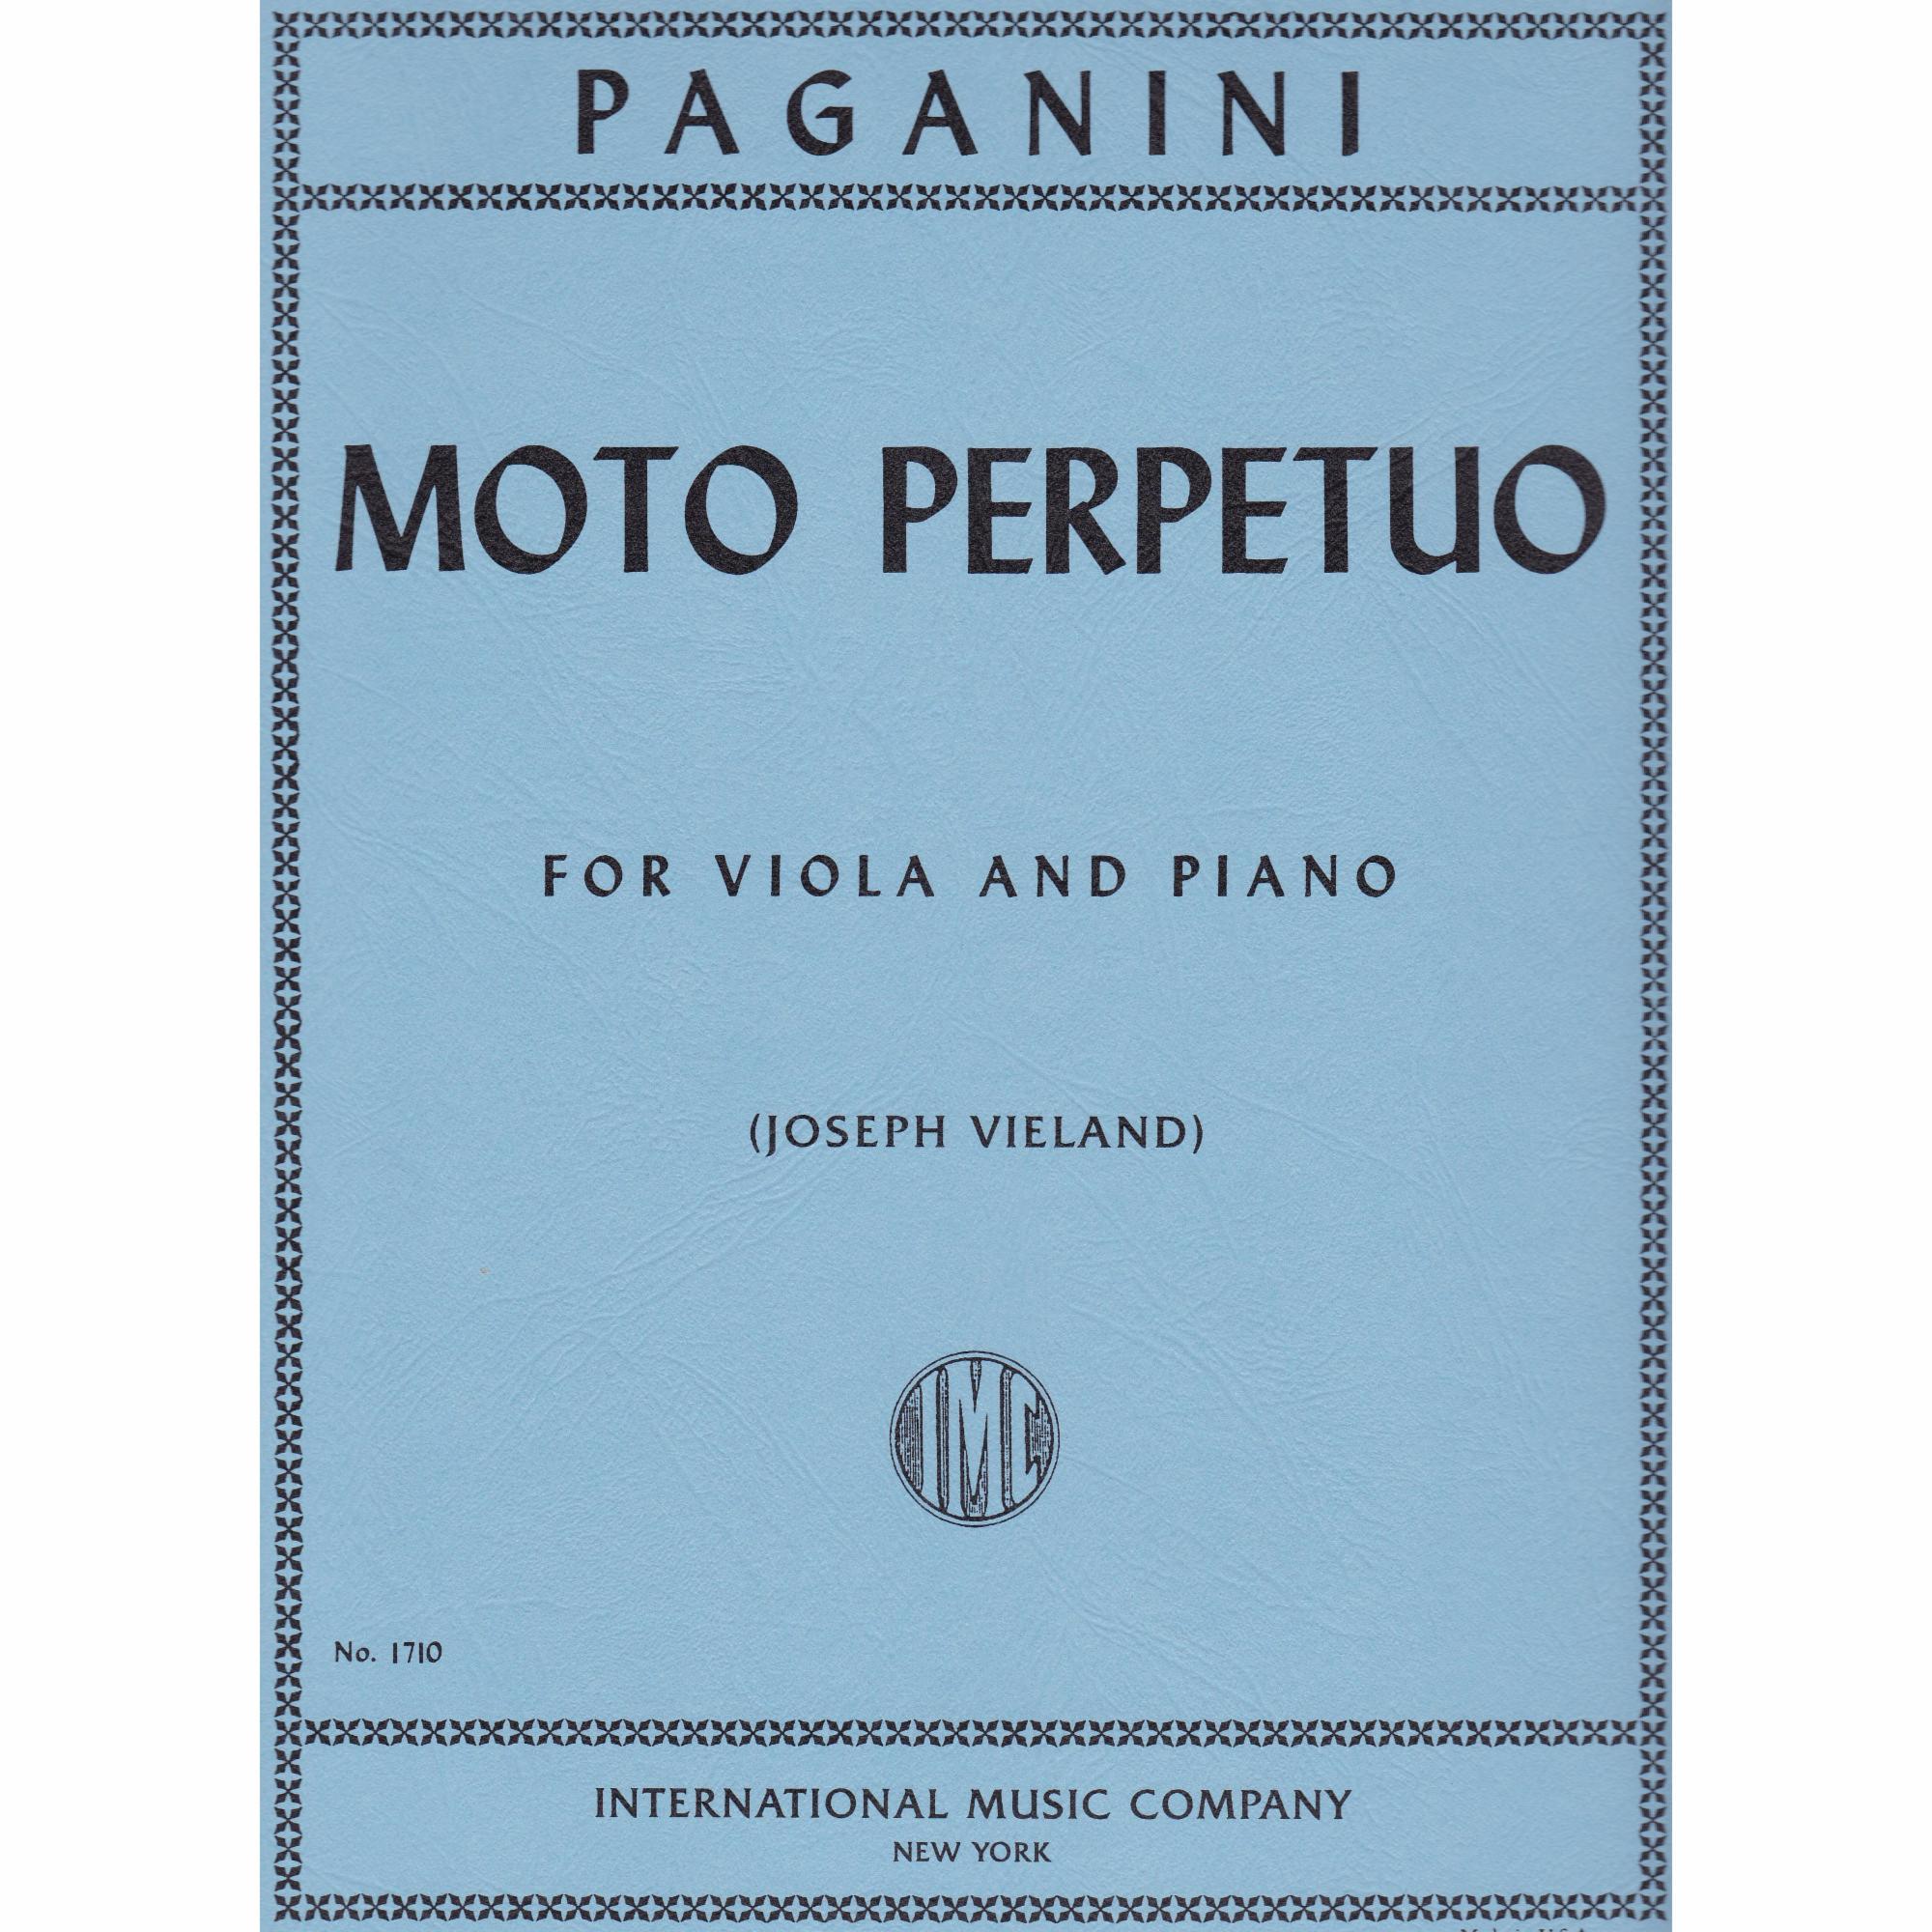 Moto Perpetuo for Viola and Piano, Op. 11